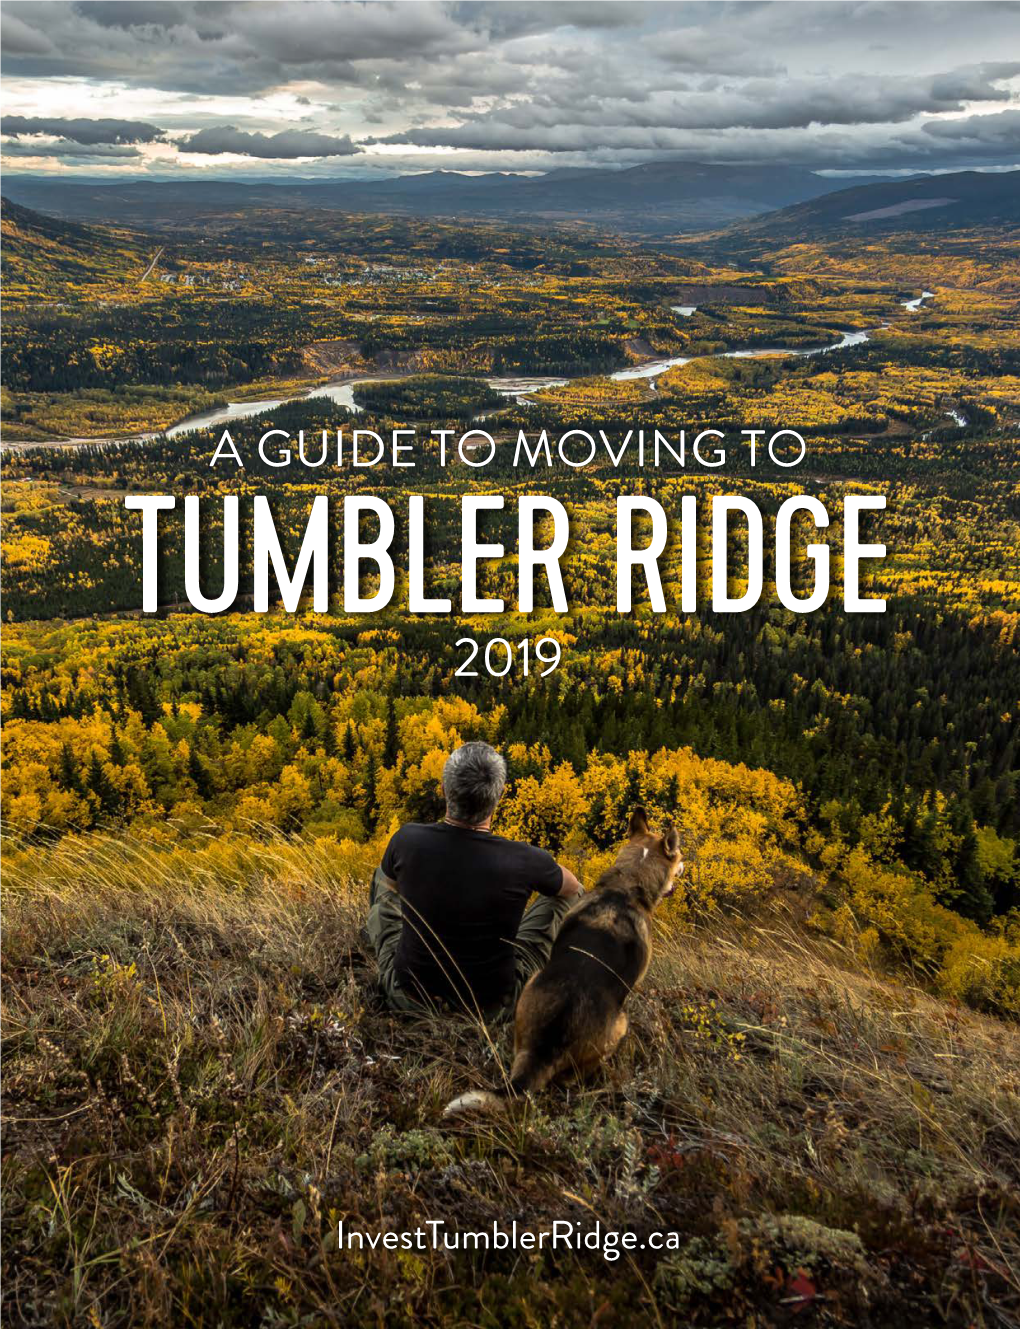 A Guide to Moving to Tumbler Ridge 2019